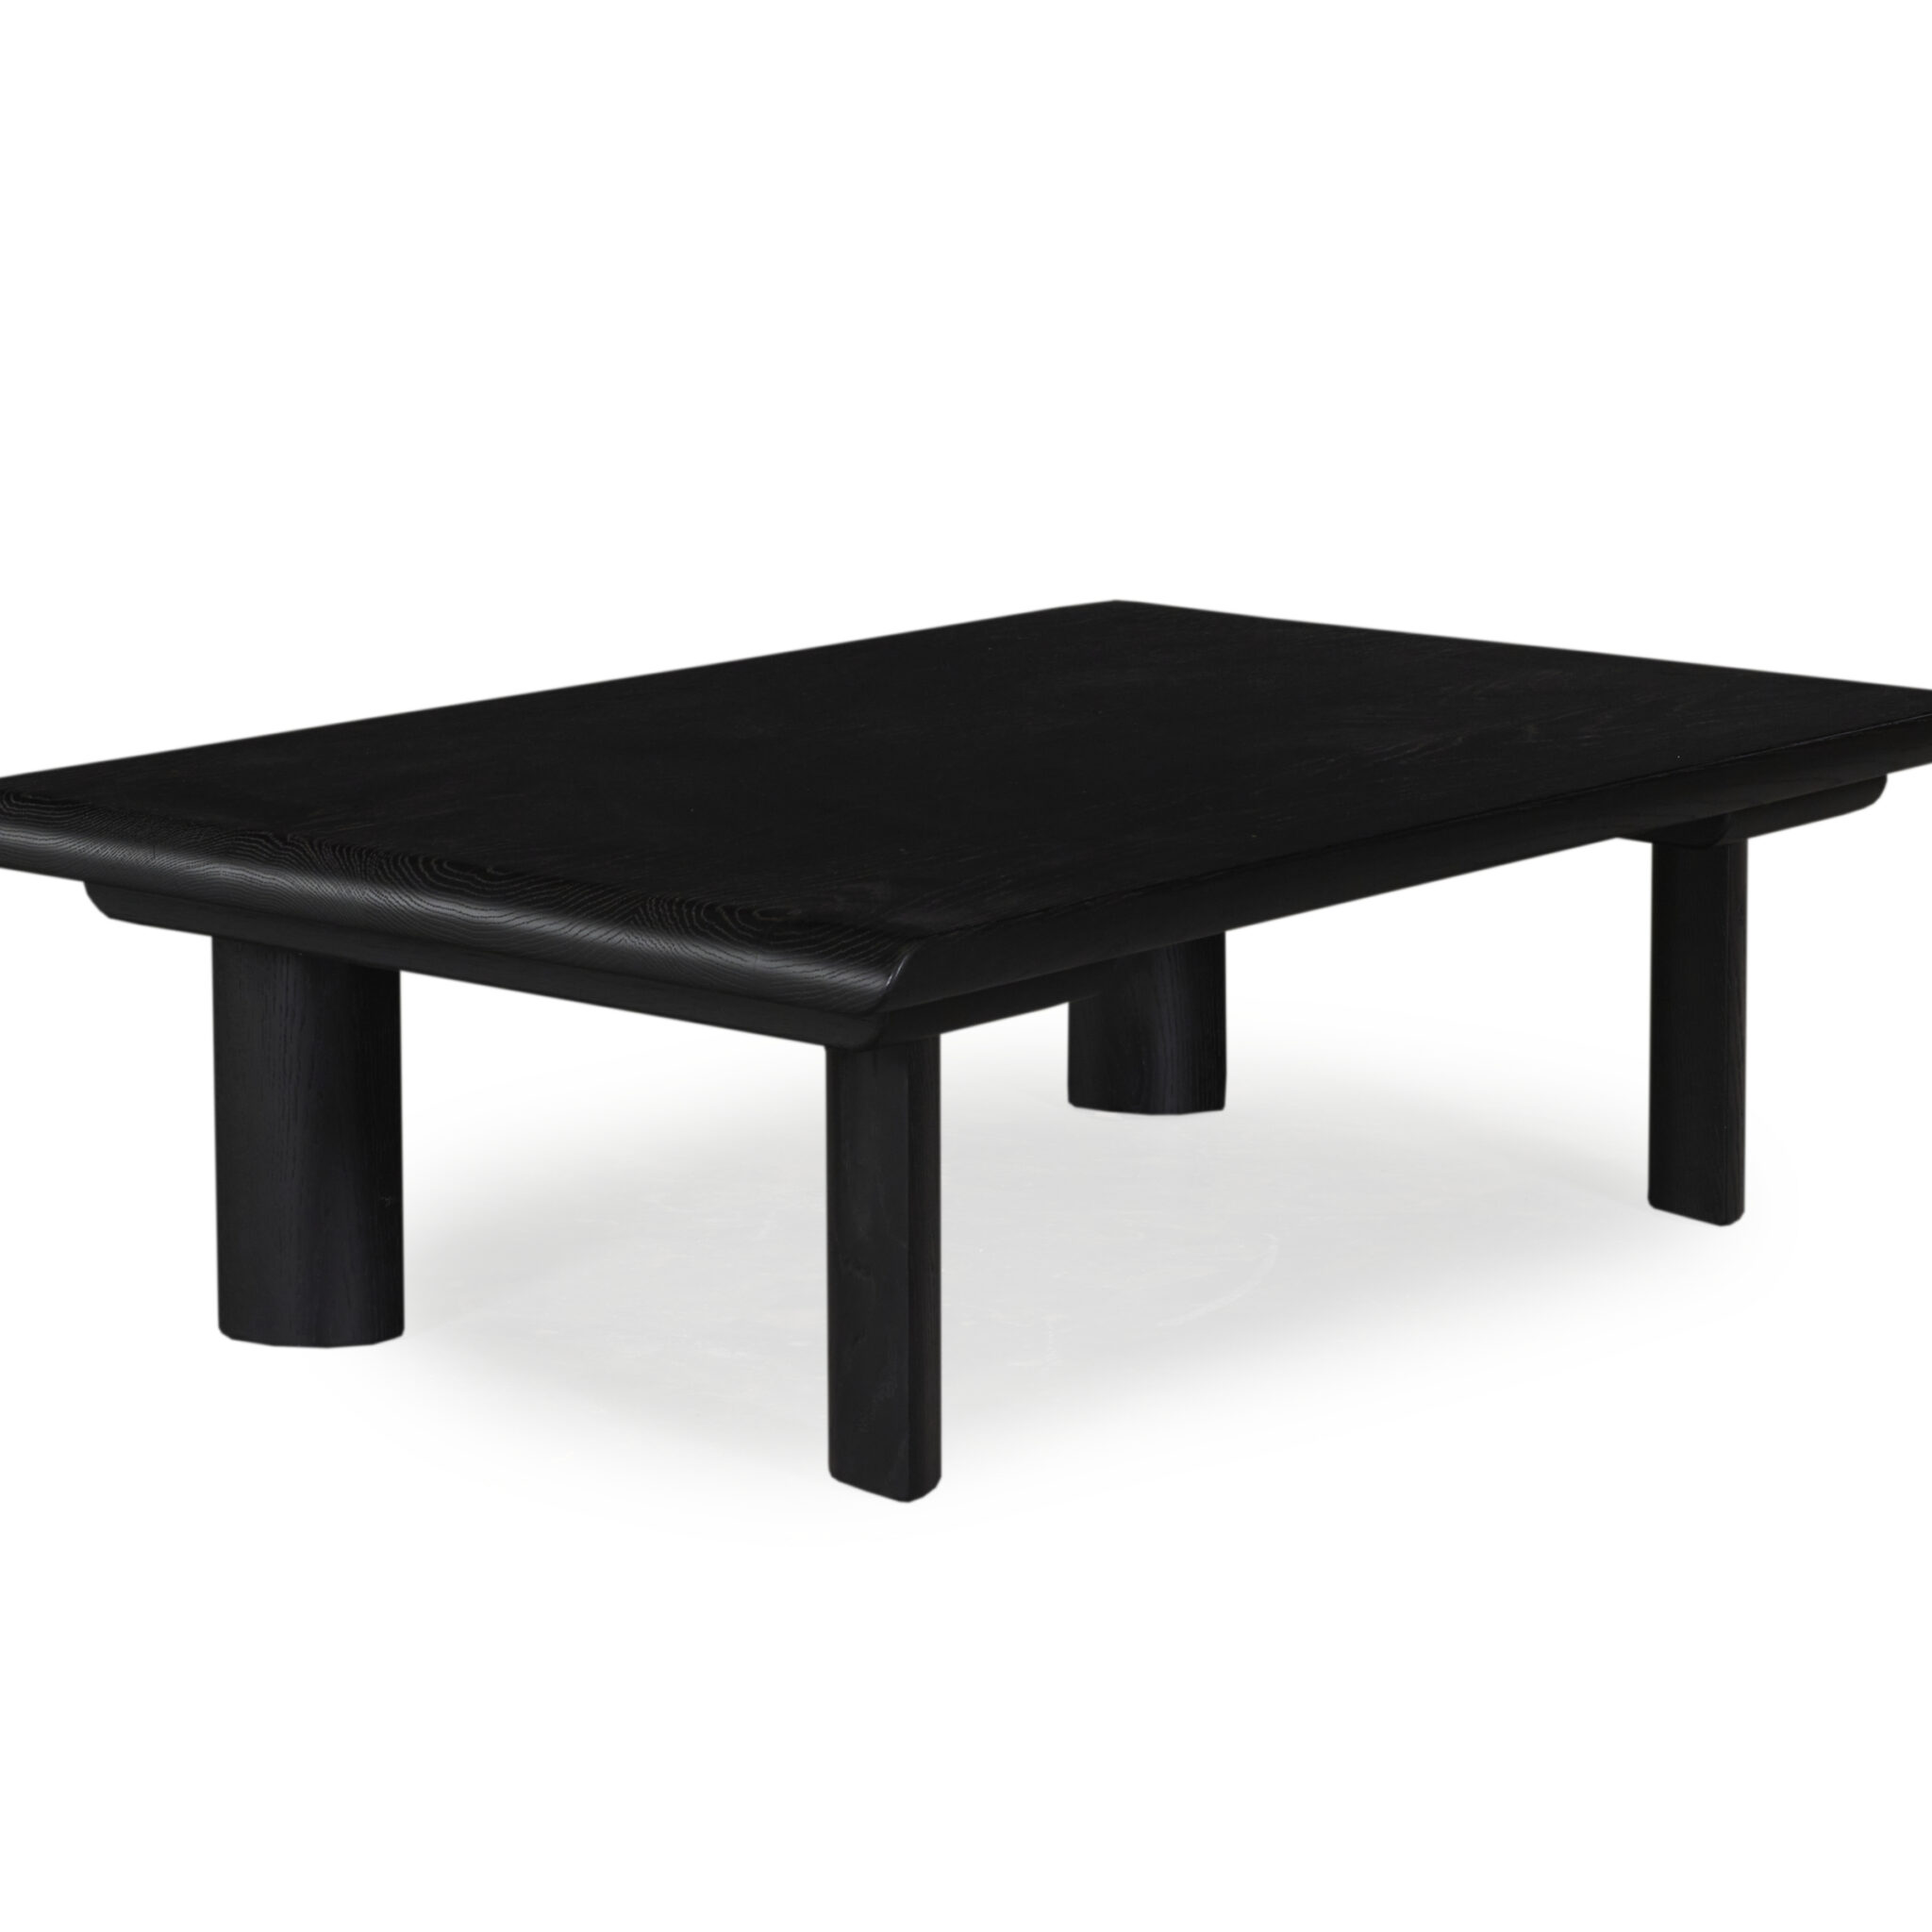 Elstern Coffee Table by Arranmore